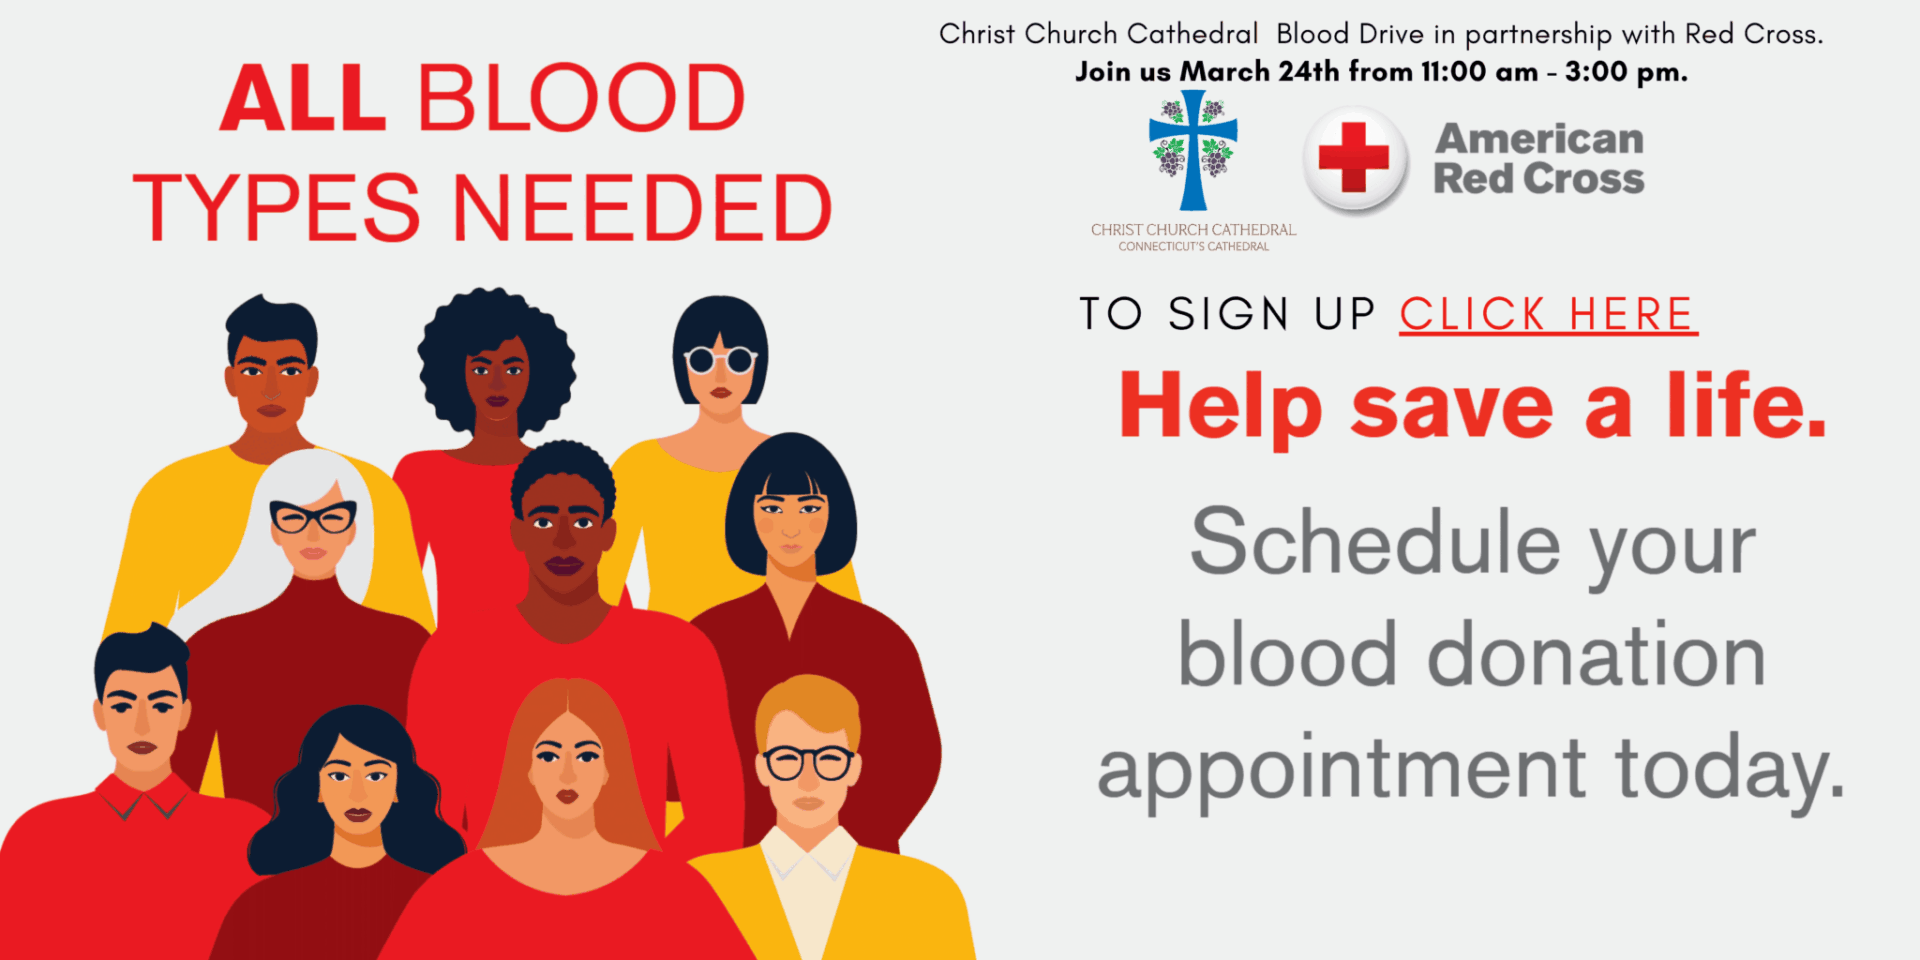 Christ Church Cathedral Blood Drive in Partnership with Red Cross